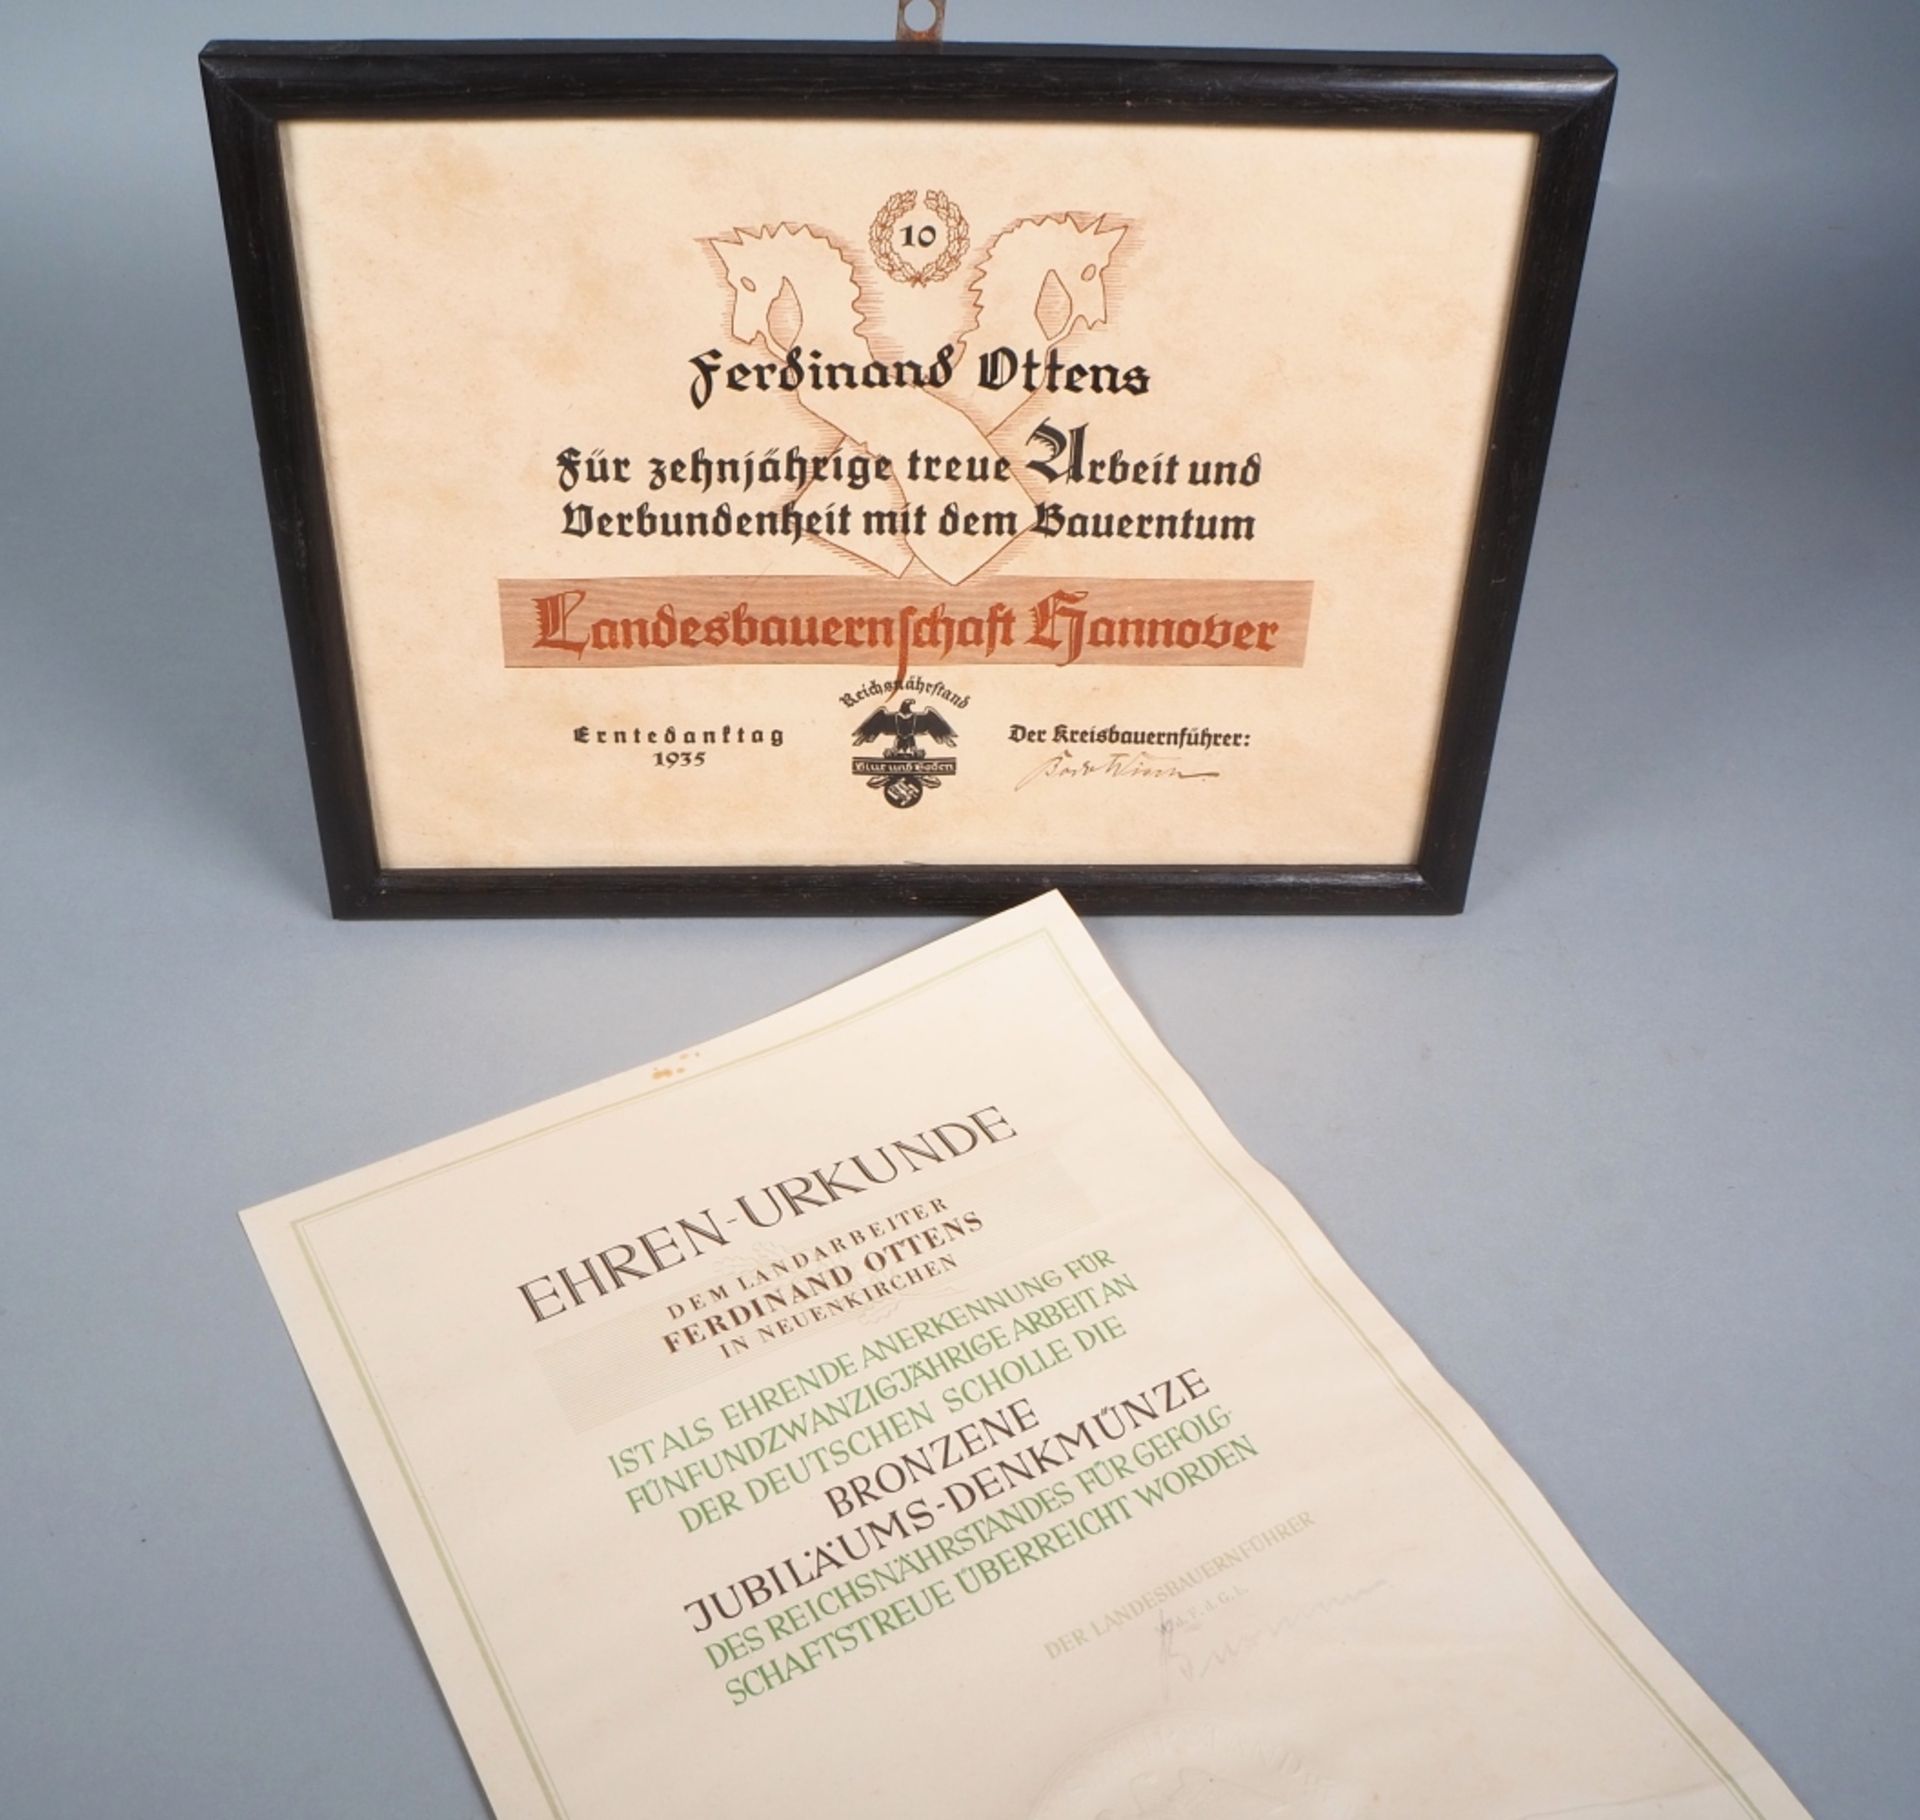 Reichsnährstand honorary and award certificate